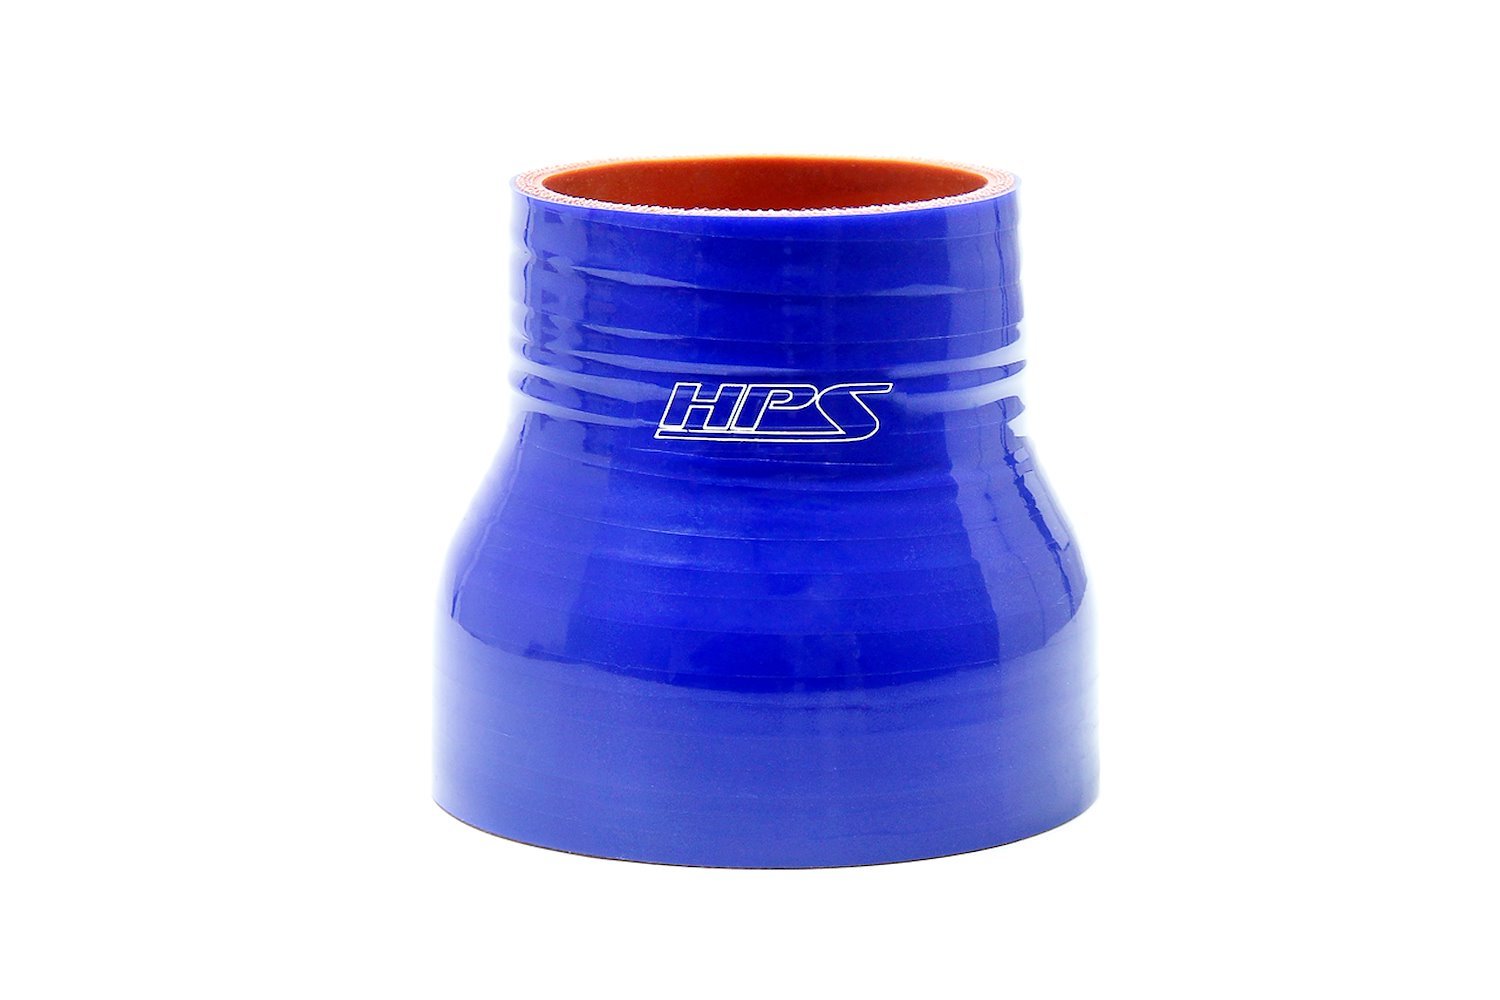 HTSR-162-175-BLUE Silicone Reducer Hose, High-Temp 4-Ply Reinforced, 1-5/8 in. - 1-3/4 in. ID, 3 in. Long, Blue